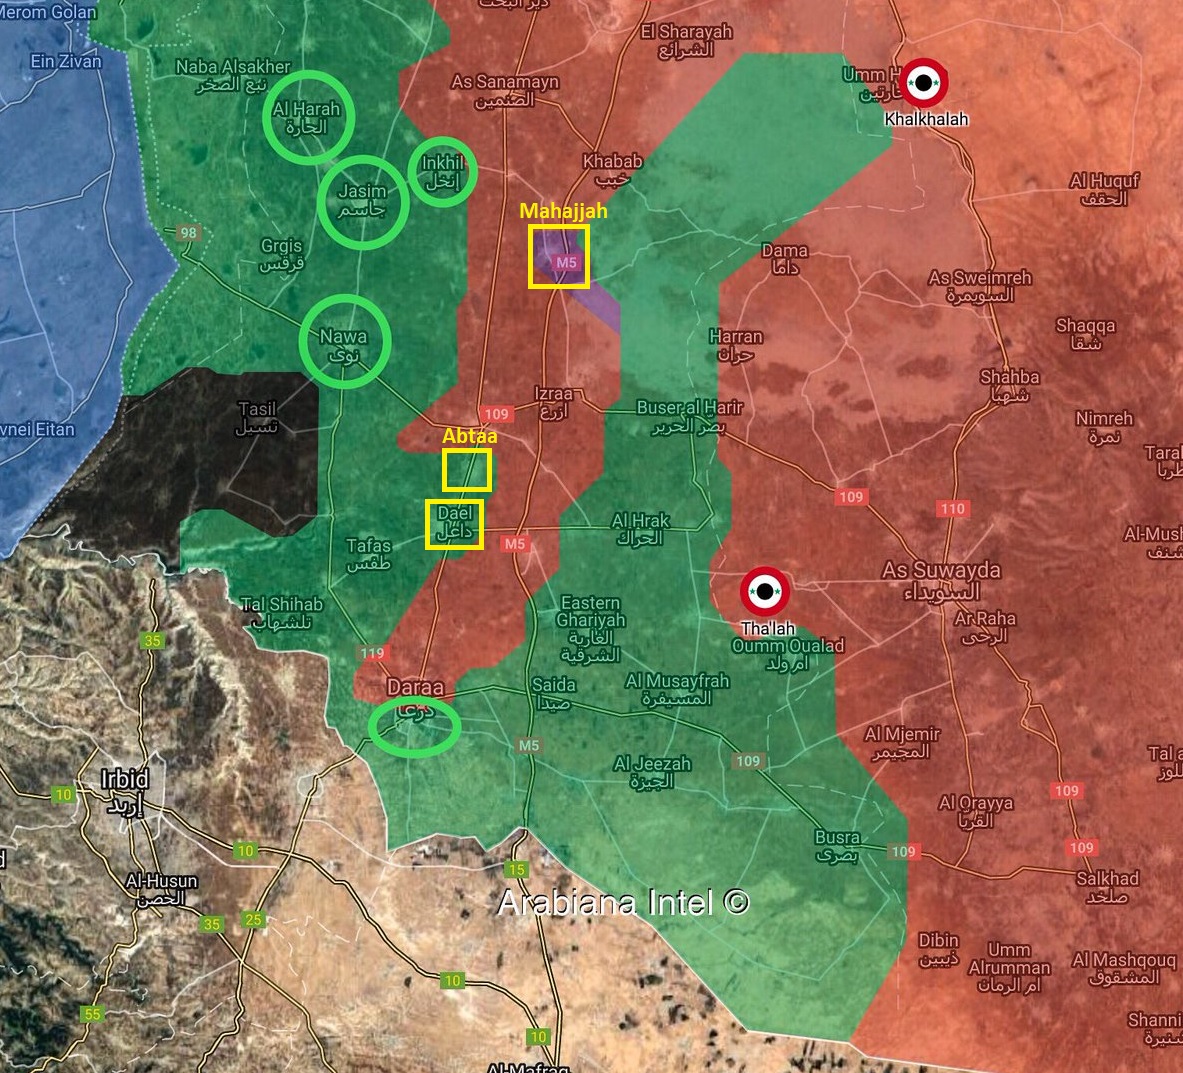 Russia And Syrian Army Send Final Warning To Militants In Several Key Towns In Daraa (Map)